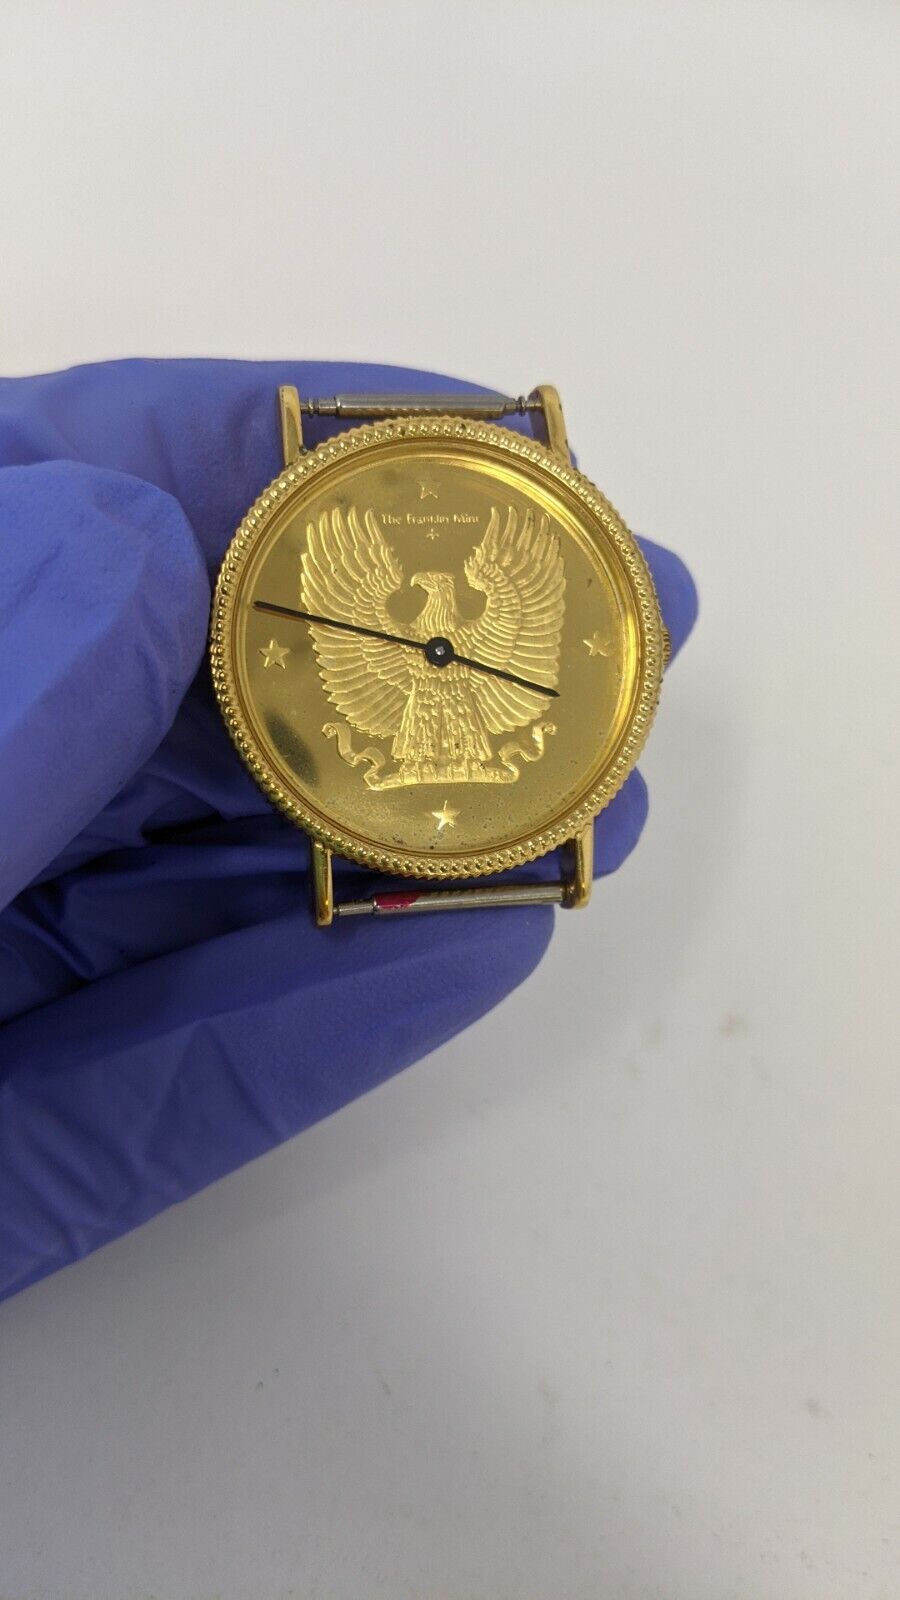 The Franklin Mint Vintage Gold Eagle Watch Swiss Made, 1986 (No band included)